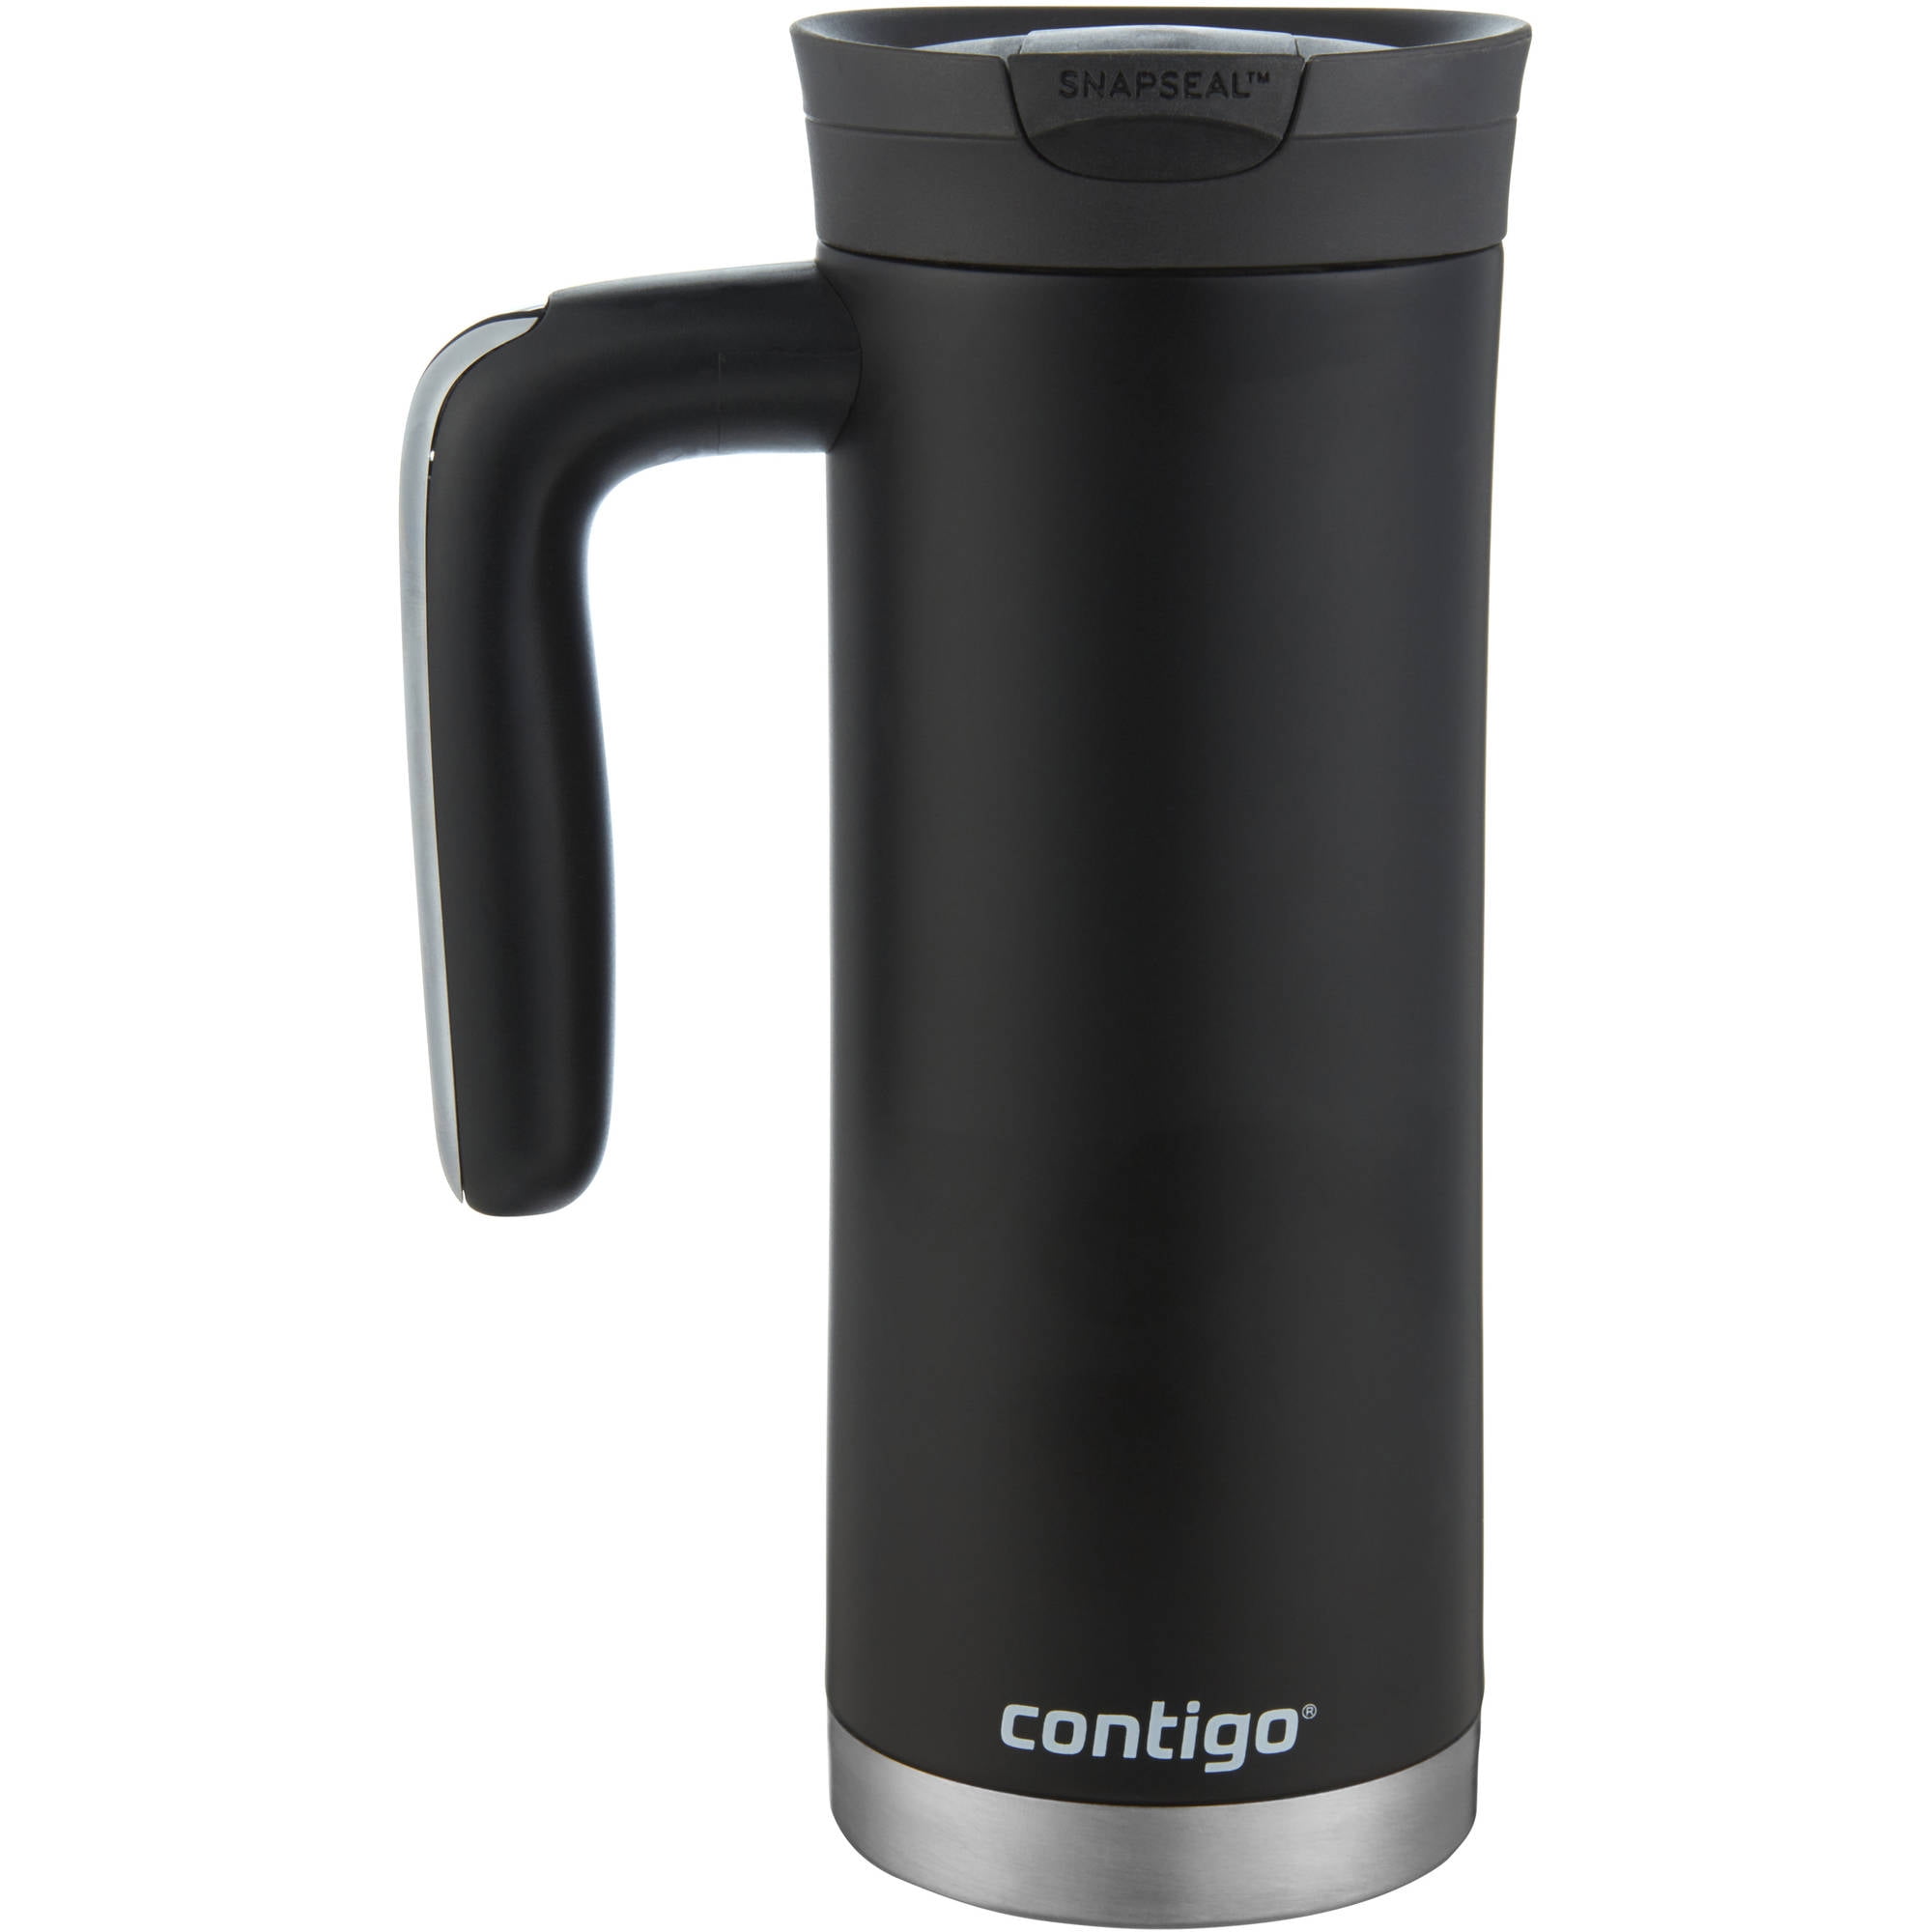 The highly-rated 20-oz Contigo Vacuum Insulated Stainless Steel Travel Mug  is down to $9 Prime shipped (Reg. up to $13)